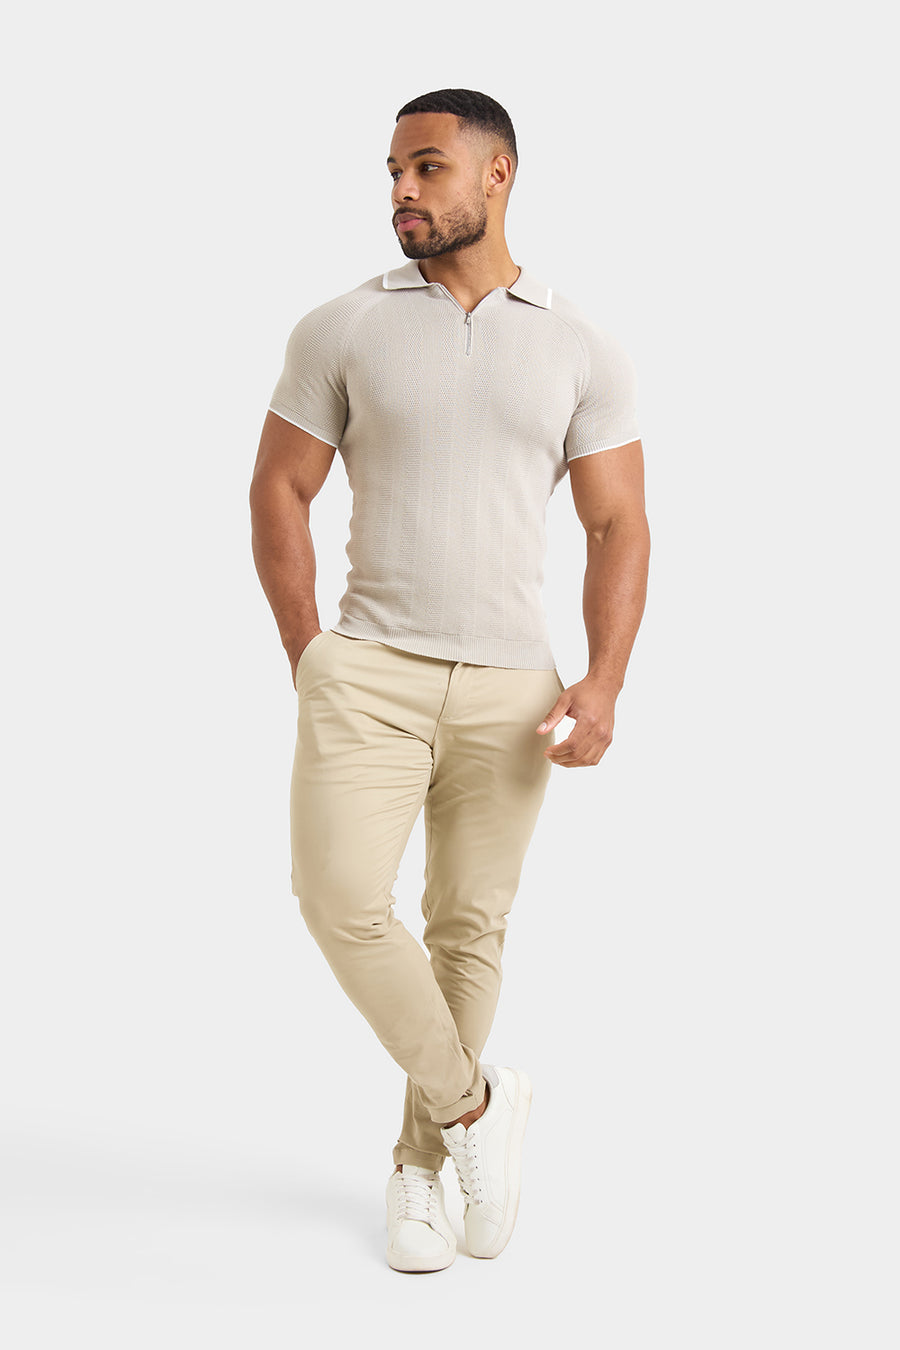 Textured Rib Zip Neck Knit Polo in Stone - TAILORED ATHLETE - USA